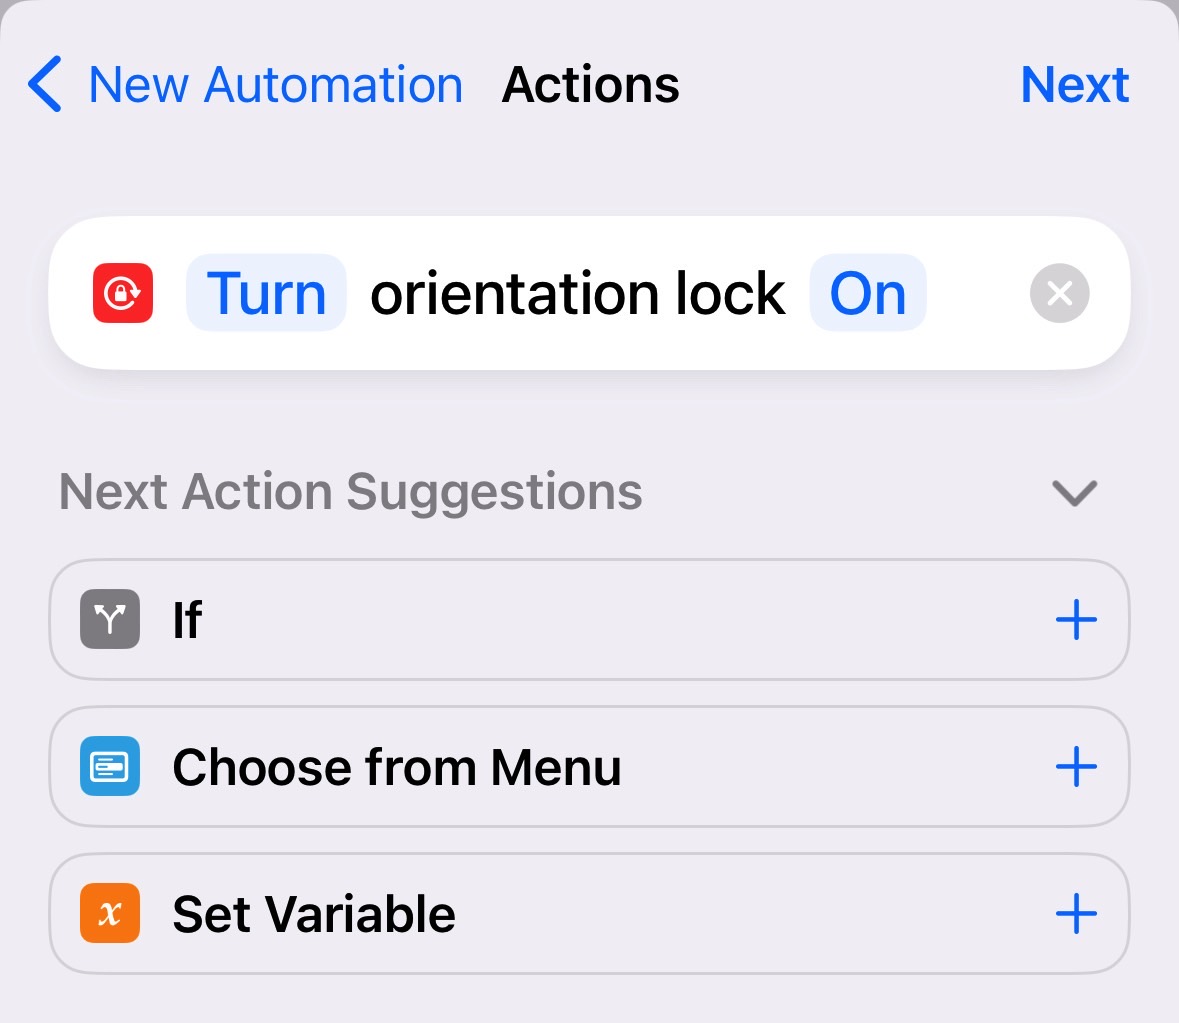 This iPhone automation enables the orientation lock when you close one of your selected apps.